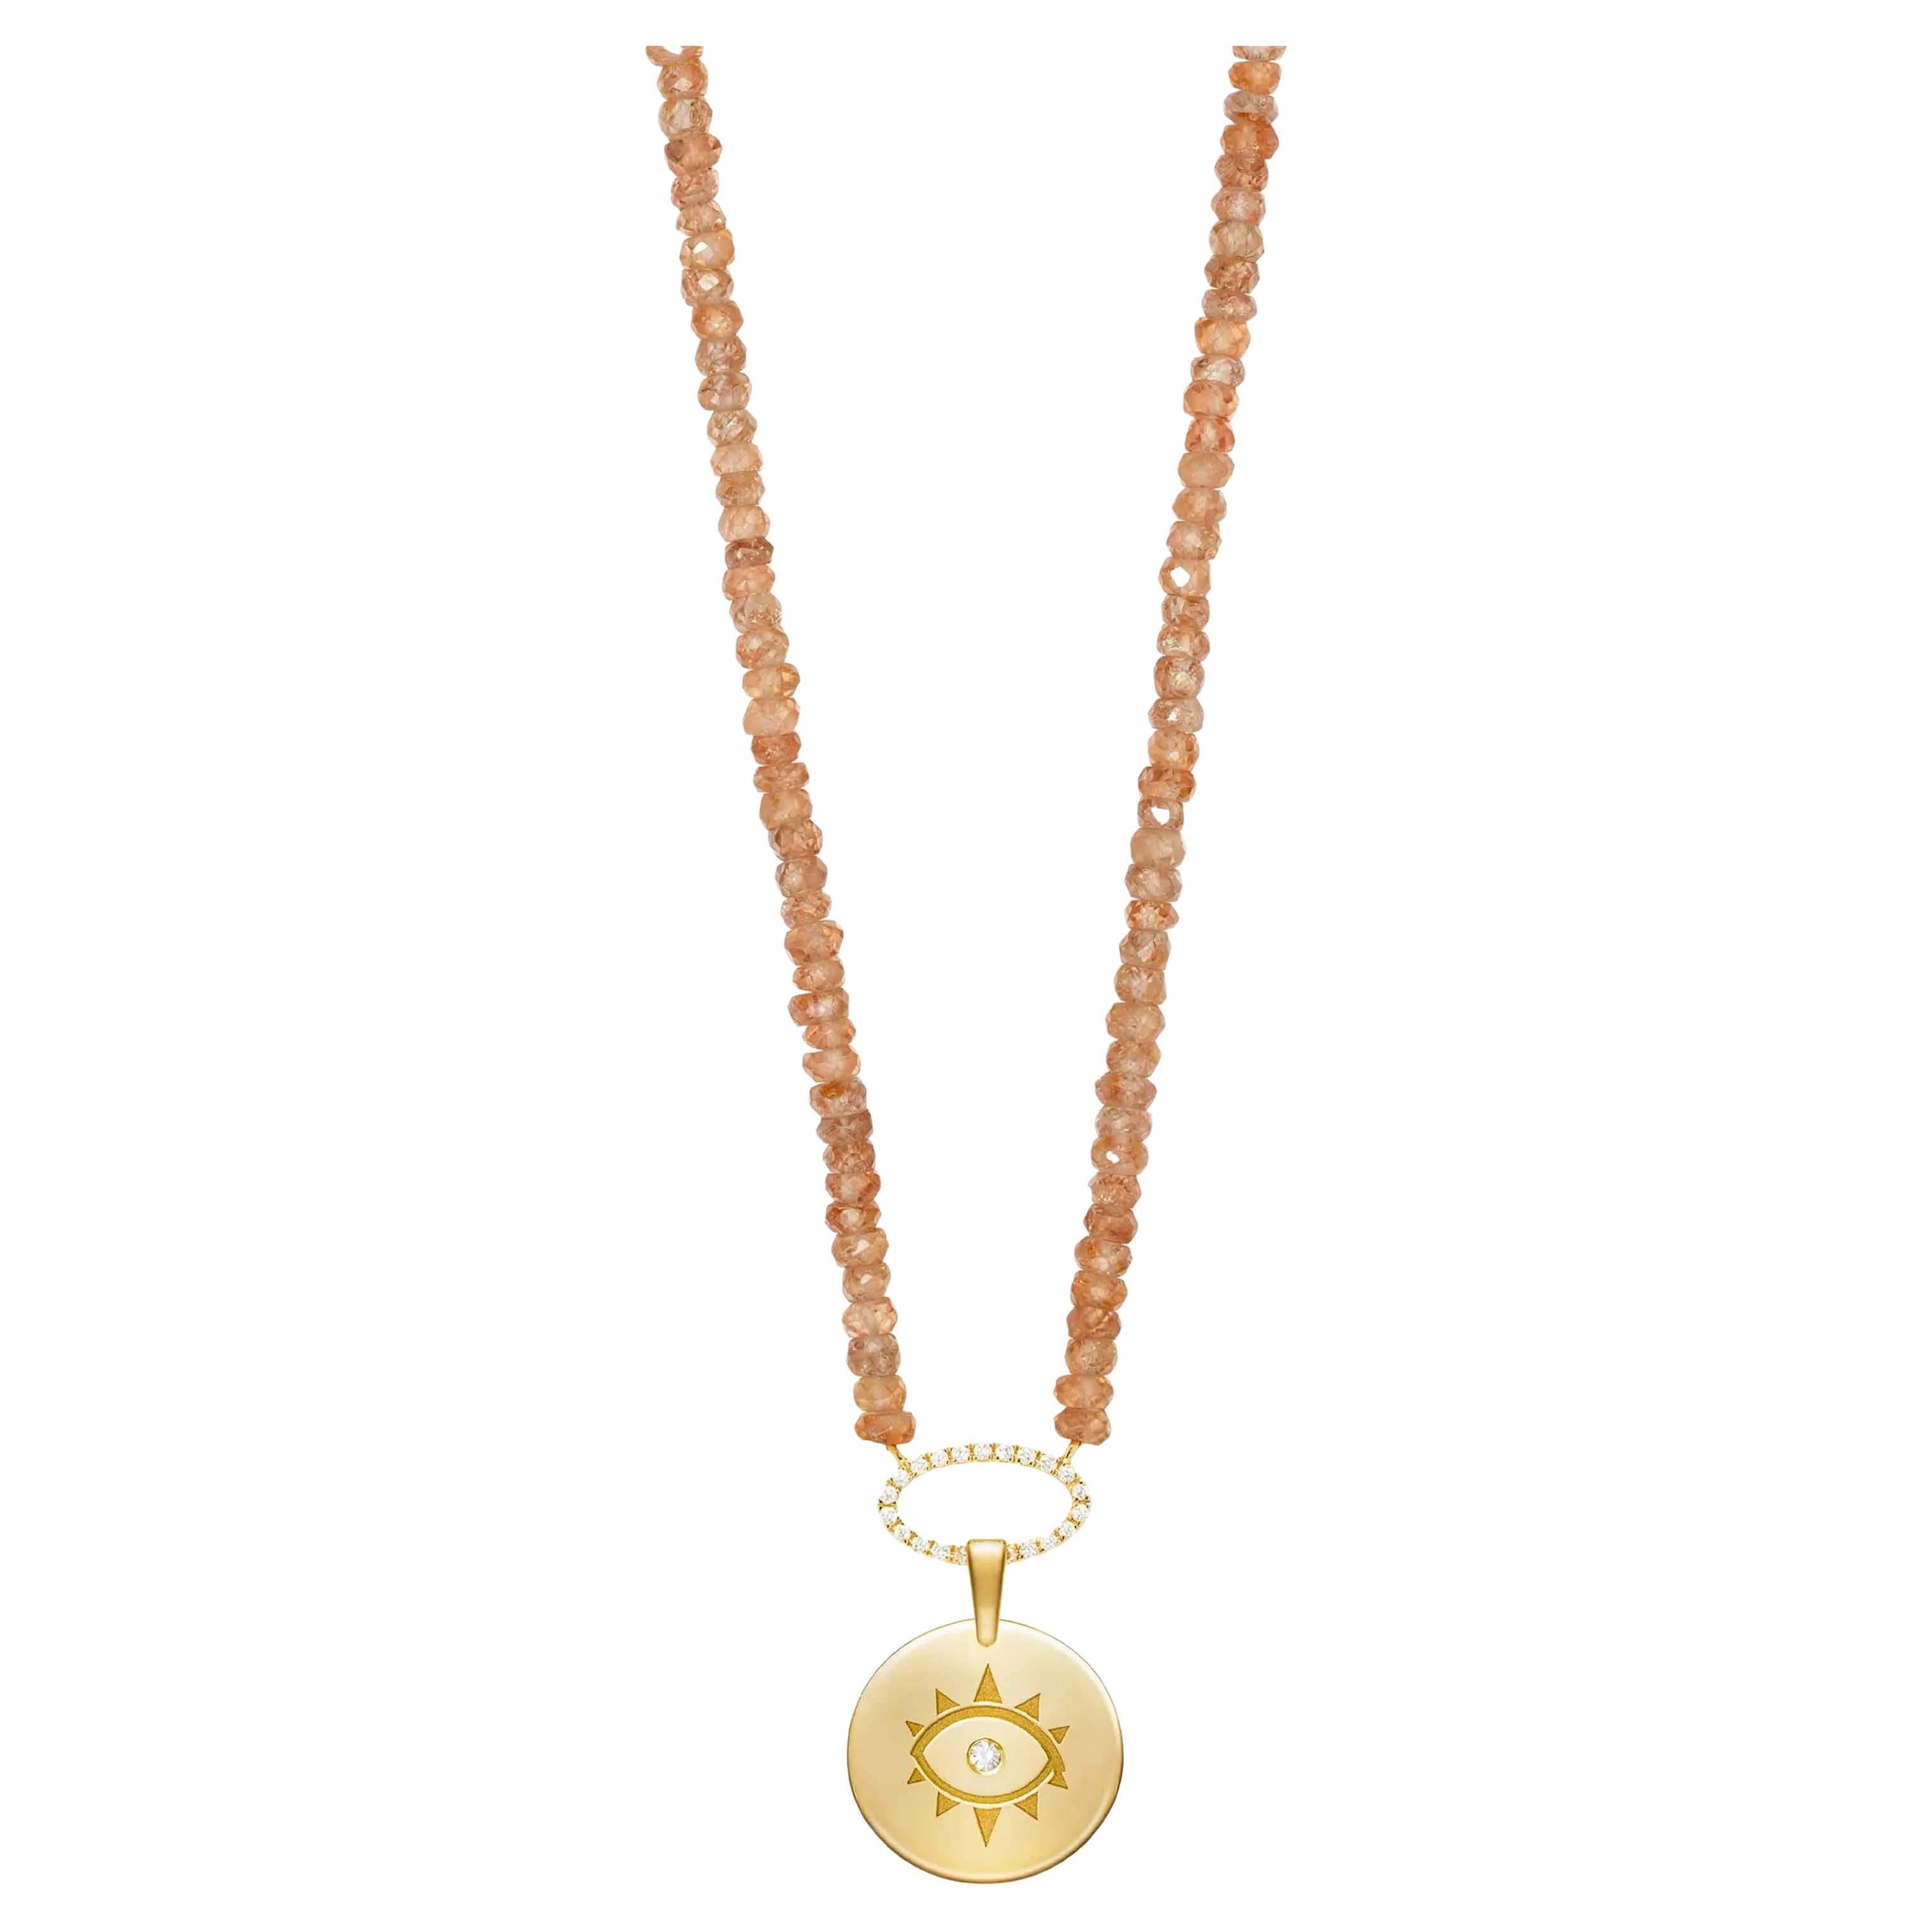 Zircon Apricot Beaded Necklace with Coin Evil Eye Pendant For Sale